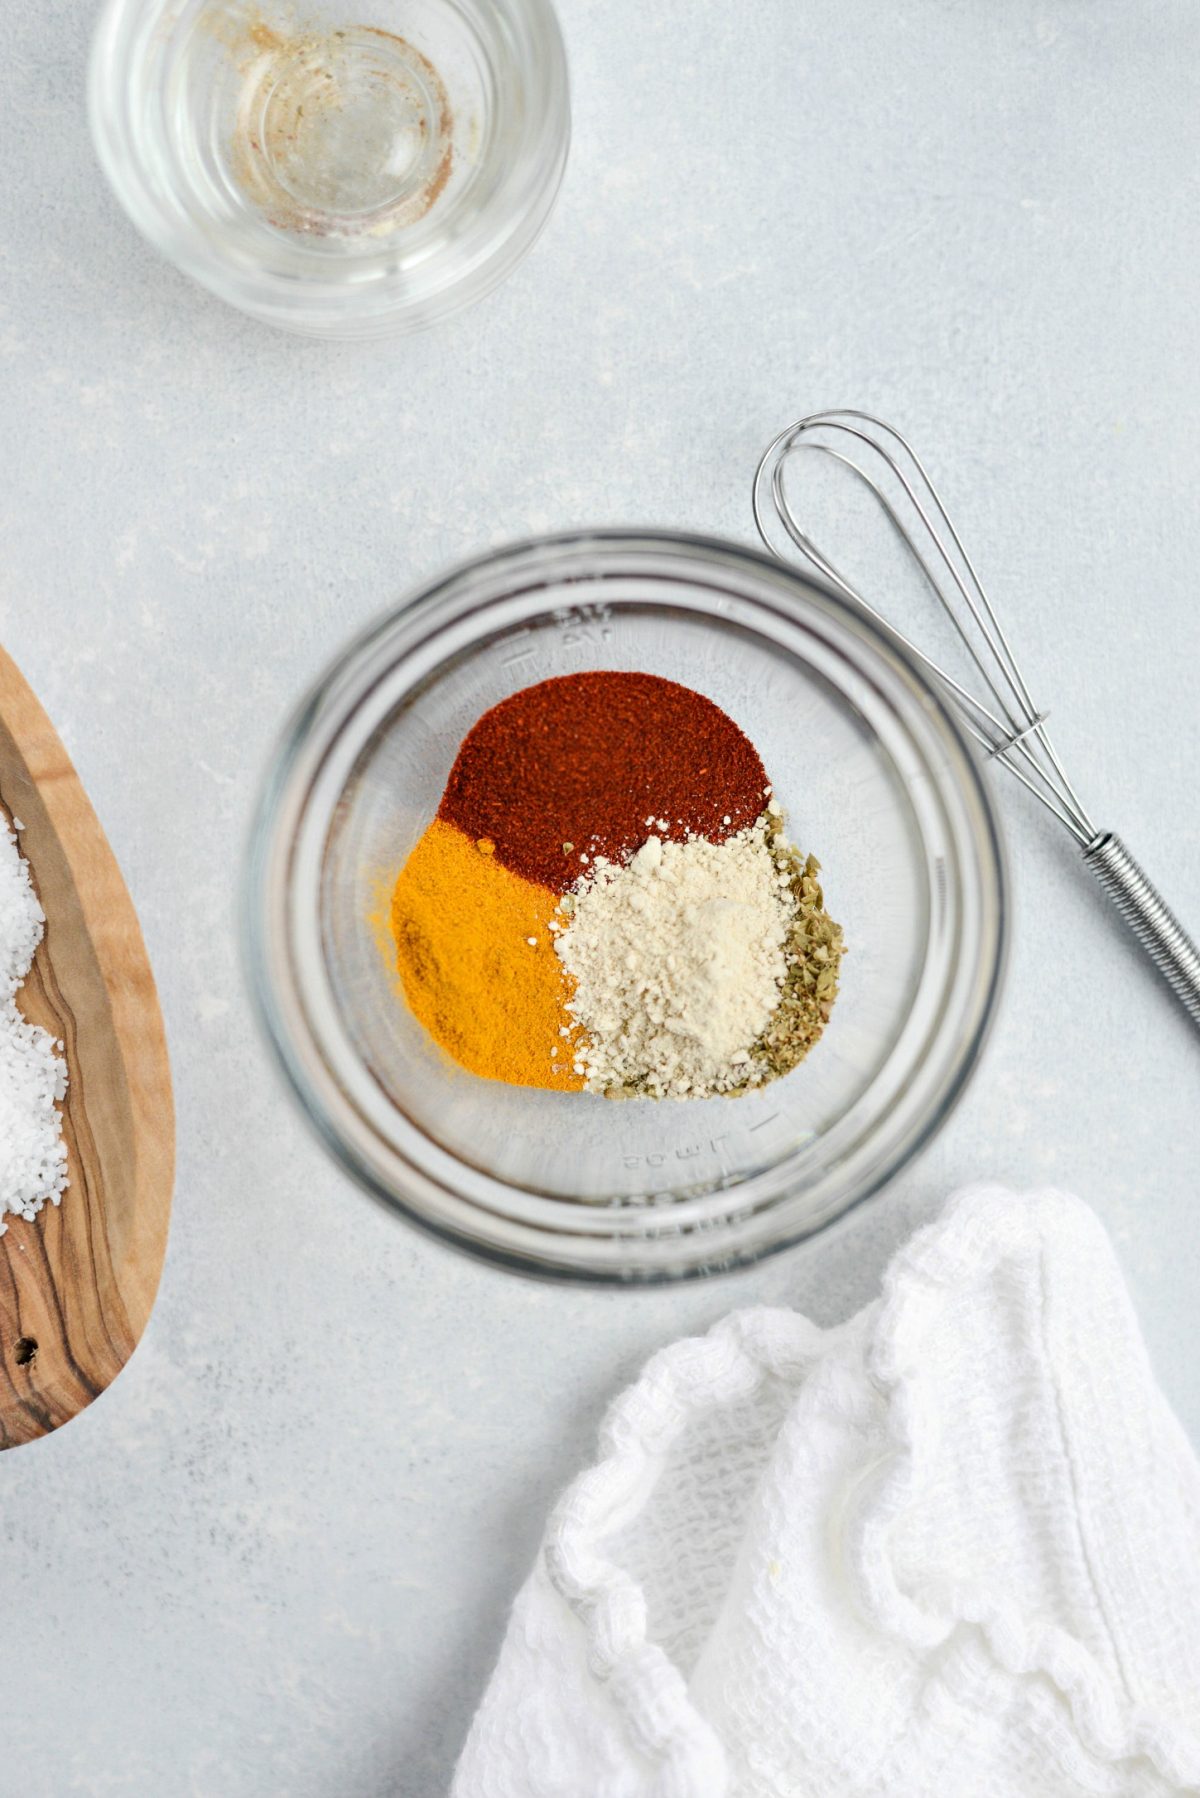 measure and add spices to a bowl or jar